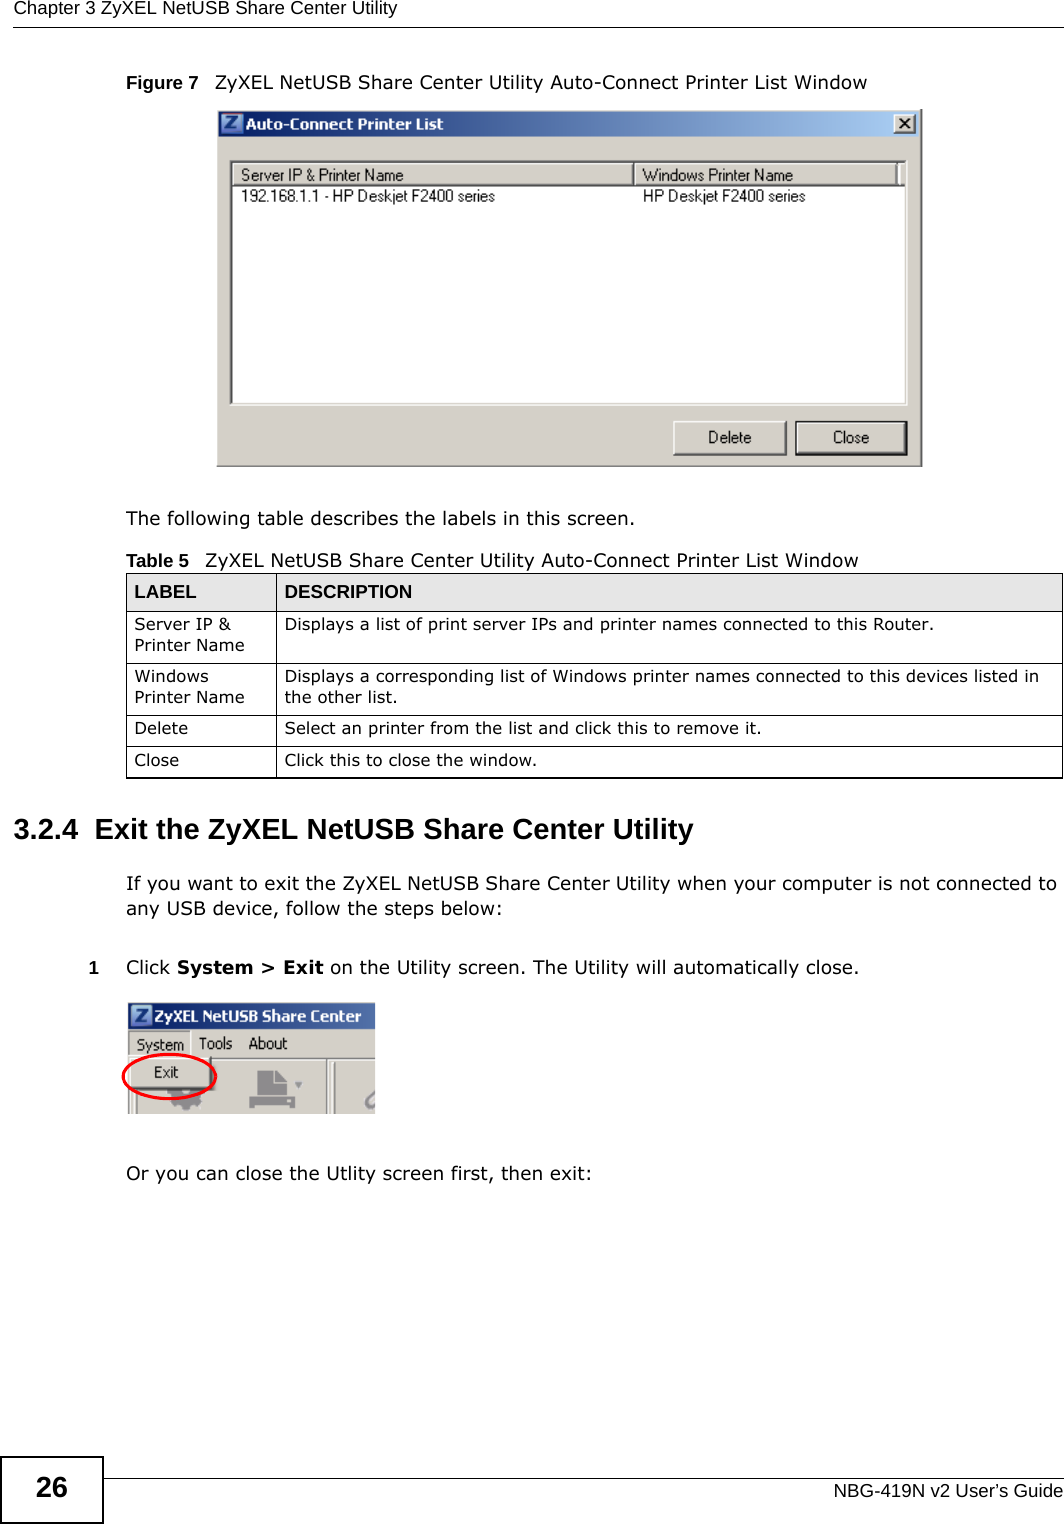 Chapter 3 ZyXEL NetUSB Share Center UtilityNBG-419N v2 User’s Guide26Figure 7   ZyXEL NetUSB Share Center Utility Auto-Connect Printer List WindowThe following table describes the labels in this screen.3.2.4  Exit the ZyXEL NetUSB Share Center UtilityIf you want to exit the ZyXEL NetUSB Share Center Utility when your computer is not connected to any USB device, follow the steps below:1Click System &gt; Exit on the Utility screen. The Utility will automatically close.Or you can close the Utlity screen first, then exit:Table 5   ZyXEL NetUSB Share Center Utility Auto-Connect Printer List WindowLABEL  DESCRIPTIONServer IP &amp; Printer NameDisplays a list of print server IPs and printer names connected to this Router.Windows Printer NameDisplays a corresponding list of Windows printer names connected to this devices listed in the other list.Delete Select an printer from the list and click this to remove it.Close Click this to close the window.